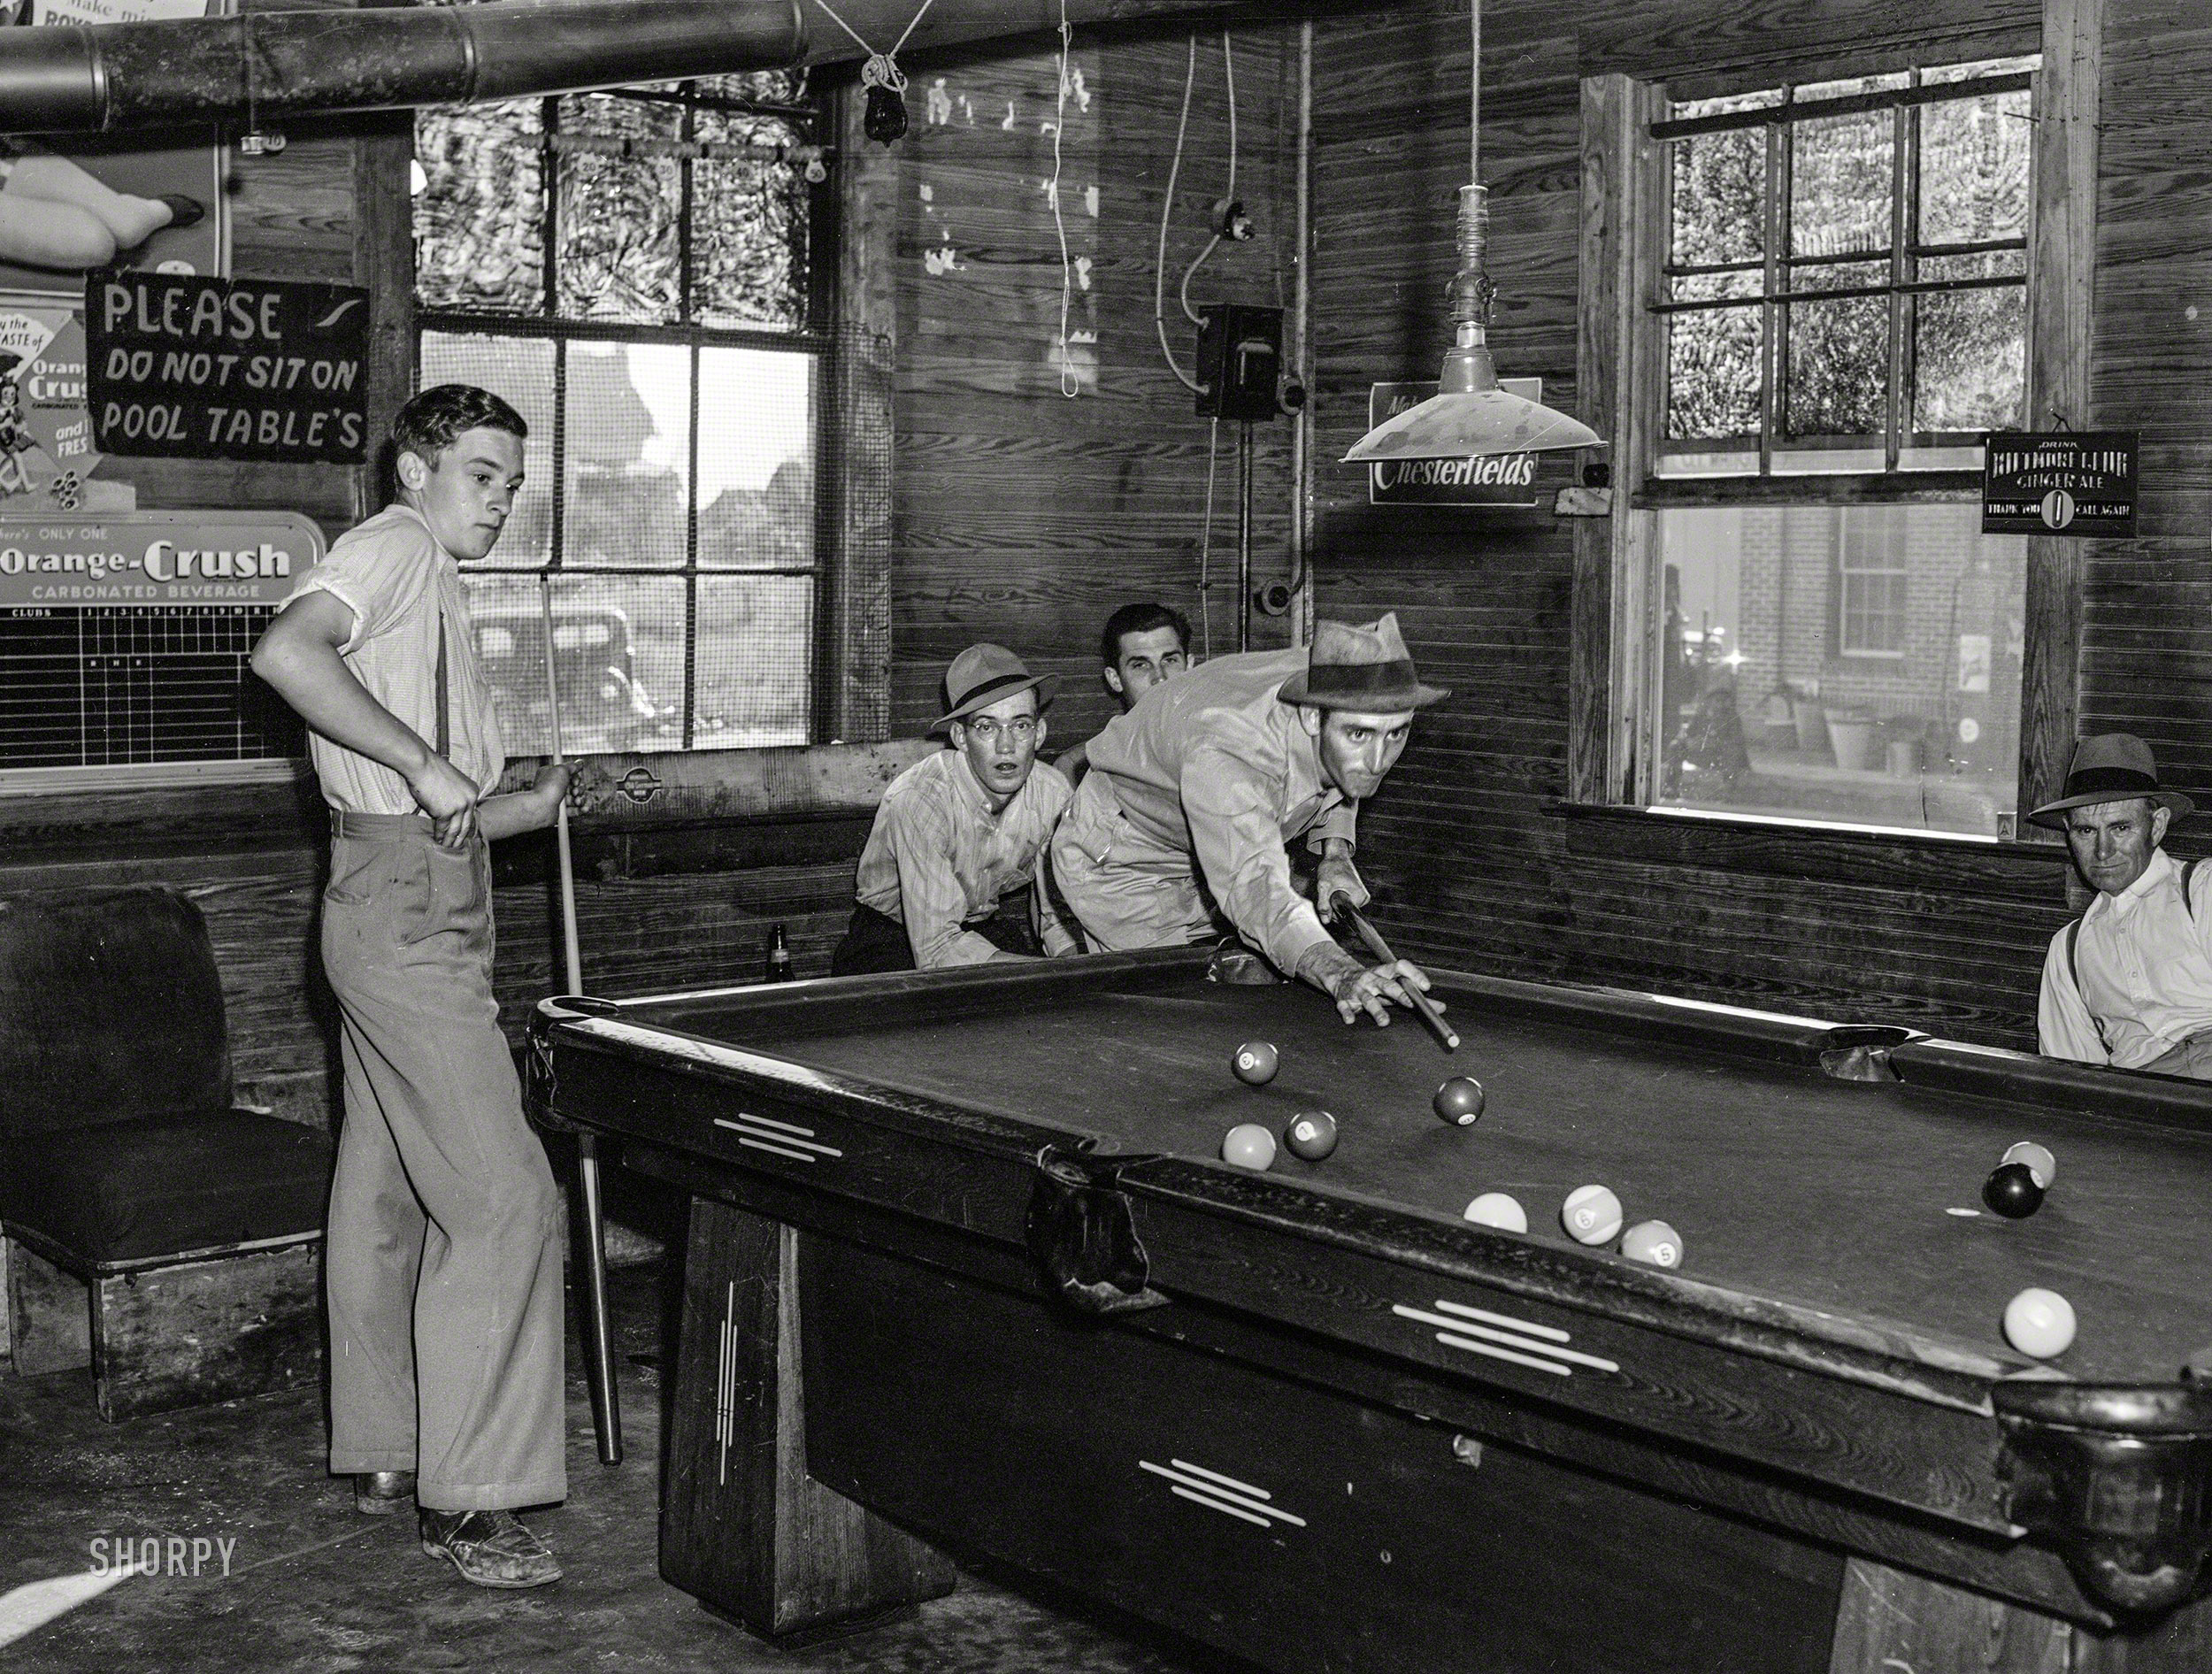 May 1940. "Interior of general store and poolroom at Stem, Granville County, North Carolina." Medium format negative by Jack Delano. View full size.